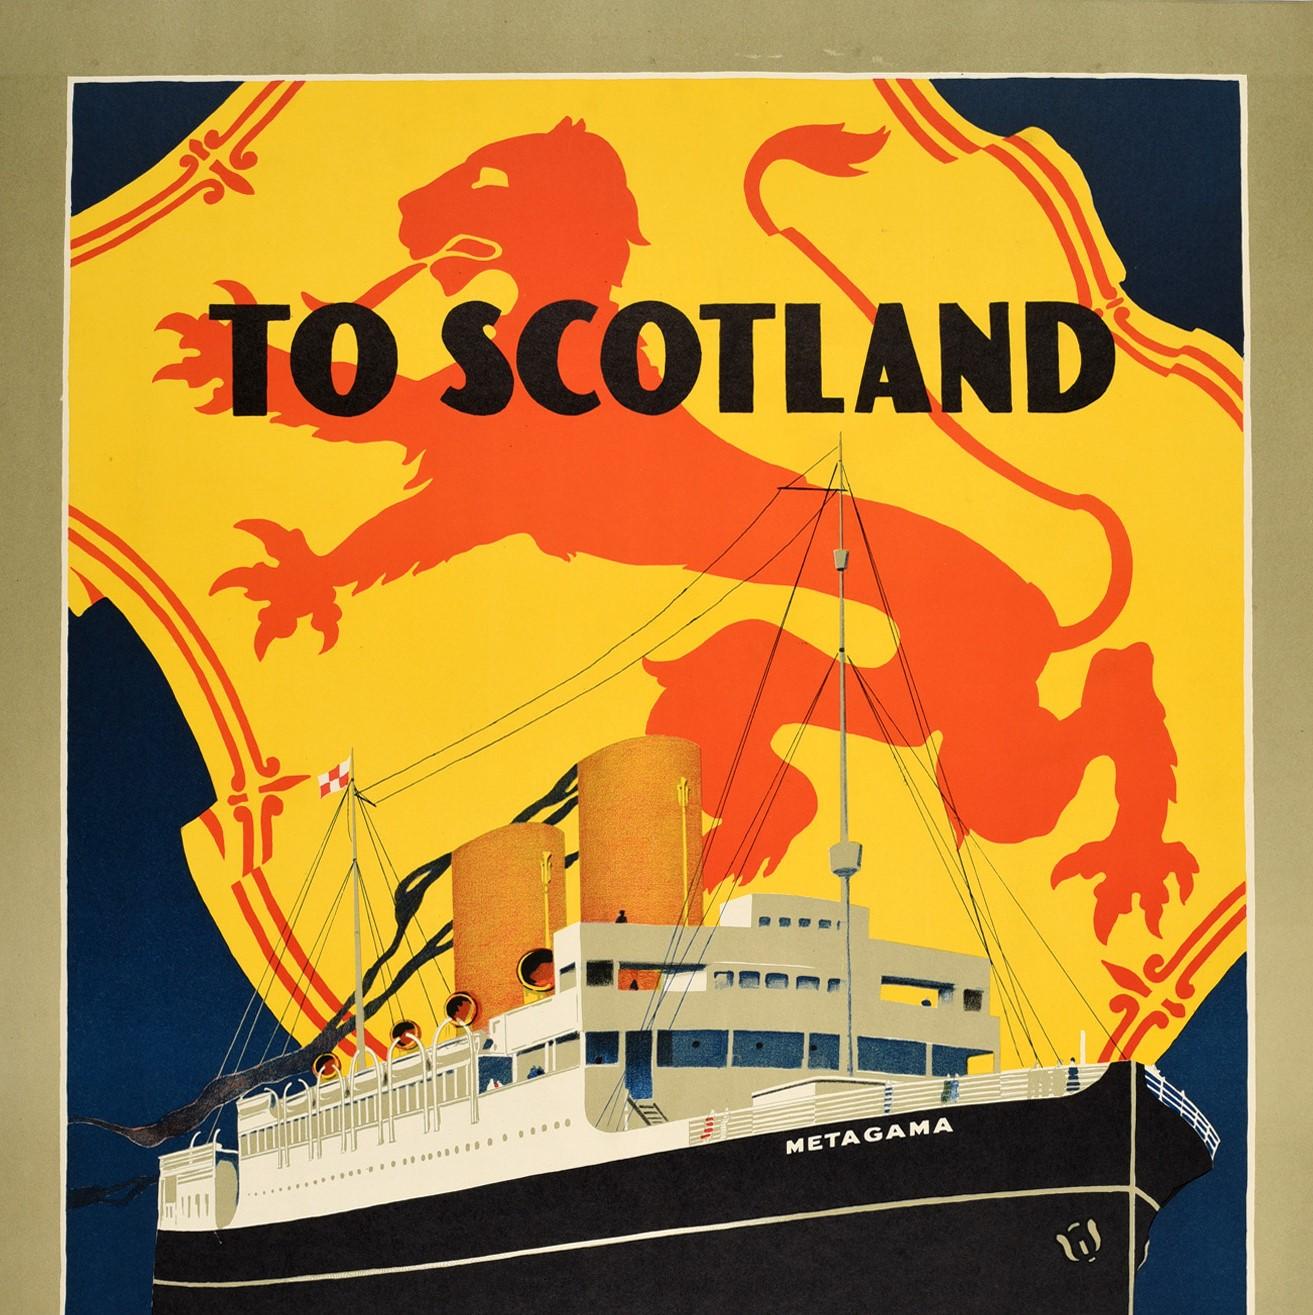 Original vintage cruise travel poster - To Scotland Canadian Pacific Steamships - featuring a dynamic design depicting a large red and yellow Royal Banner of Scotland flag with the lion rampant inside the decorative fleur-de-lis border flying above